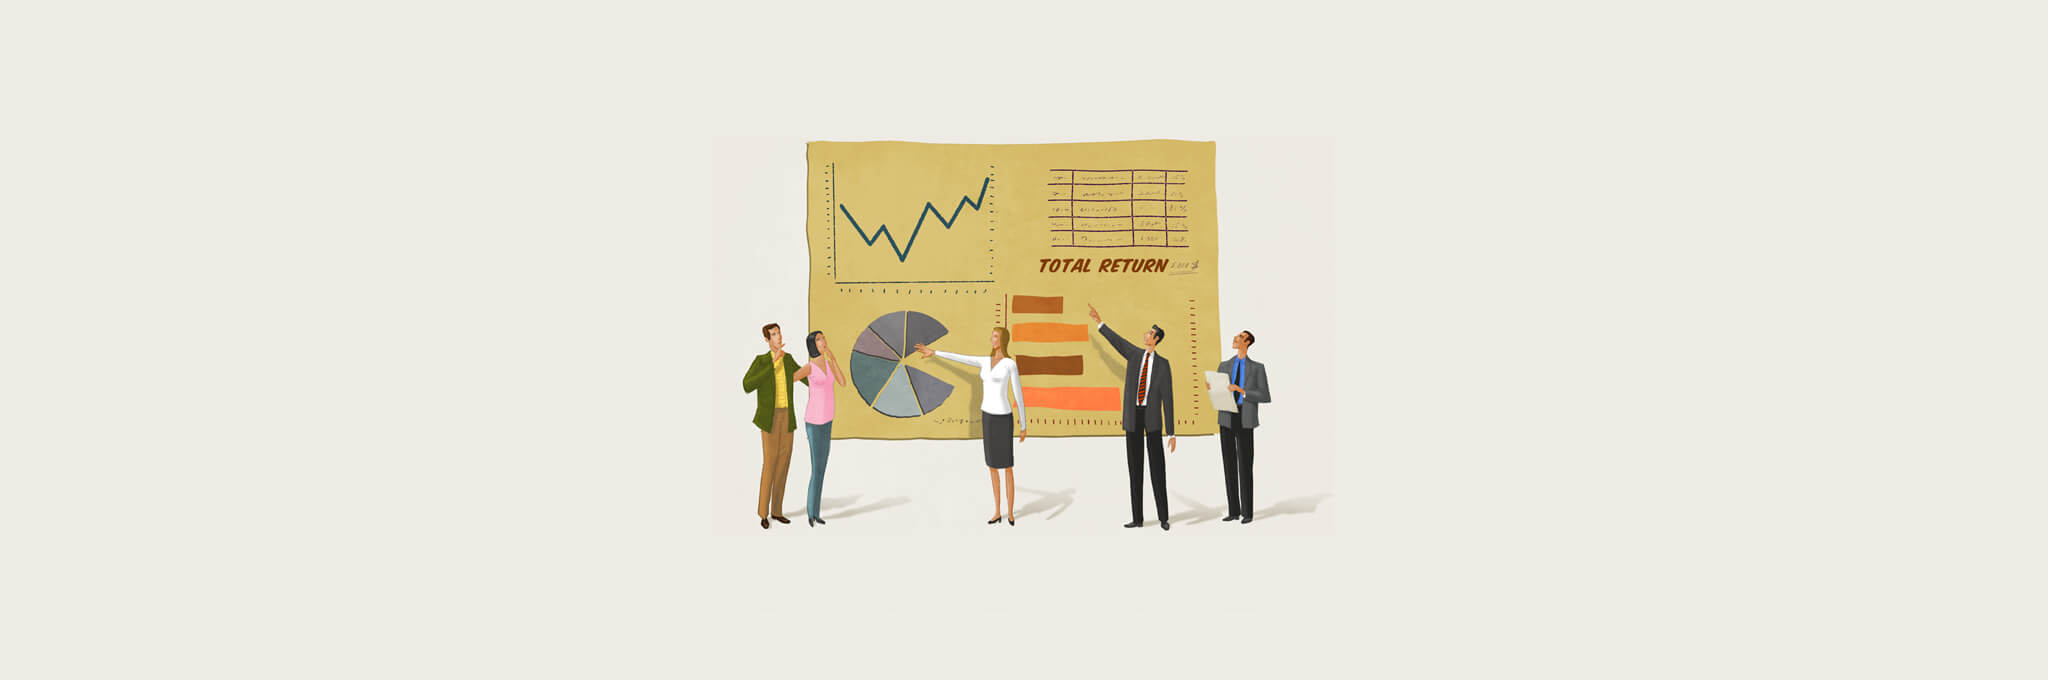 Illustration of 5 people looking/pointing at a yellow wall of charts and graphs